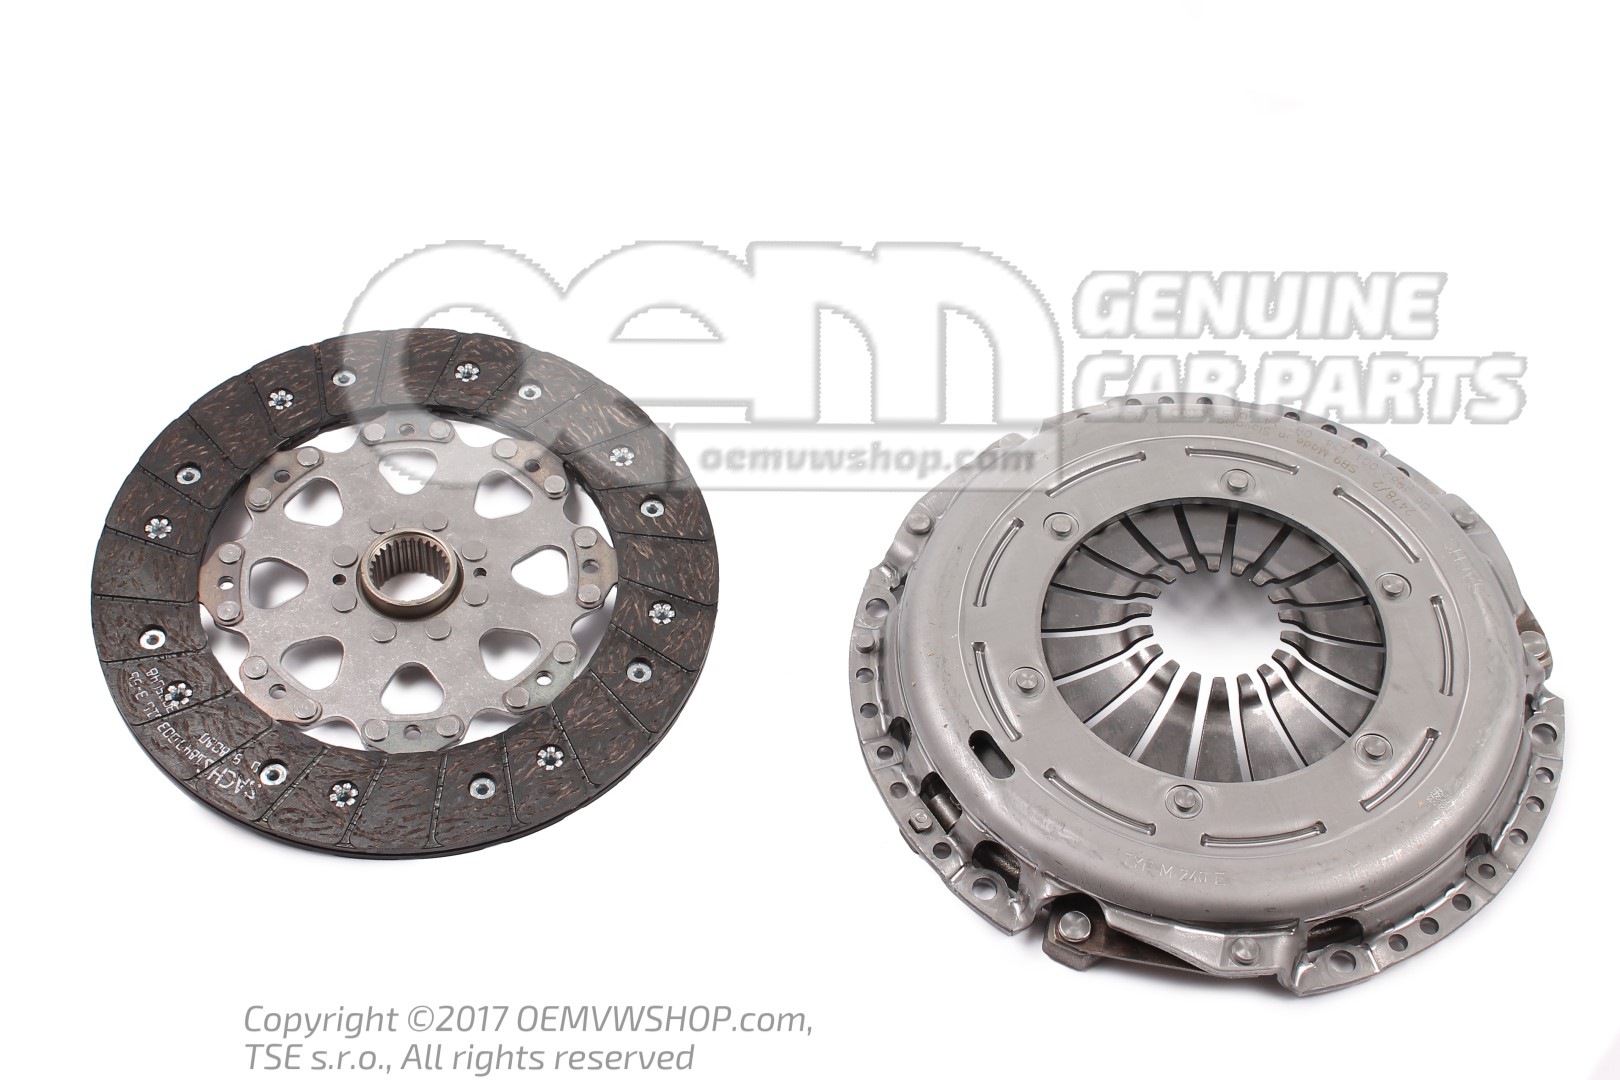 Centrifugal Clutch plate compactor packer MBW GPR135 Reversible 1" shaft 135